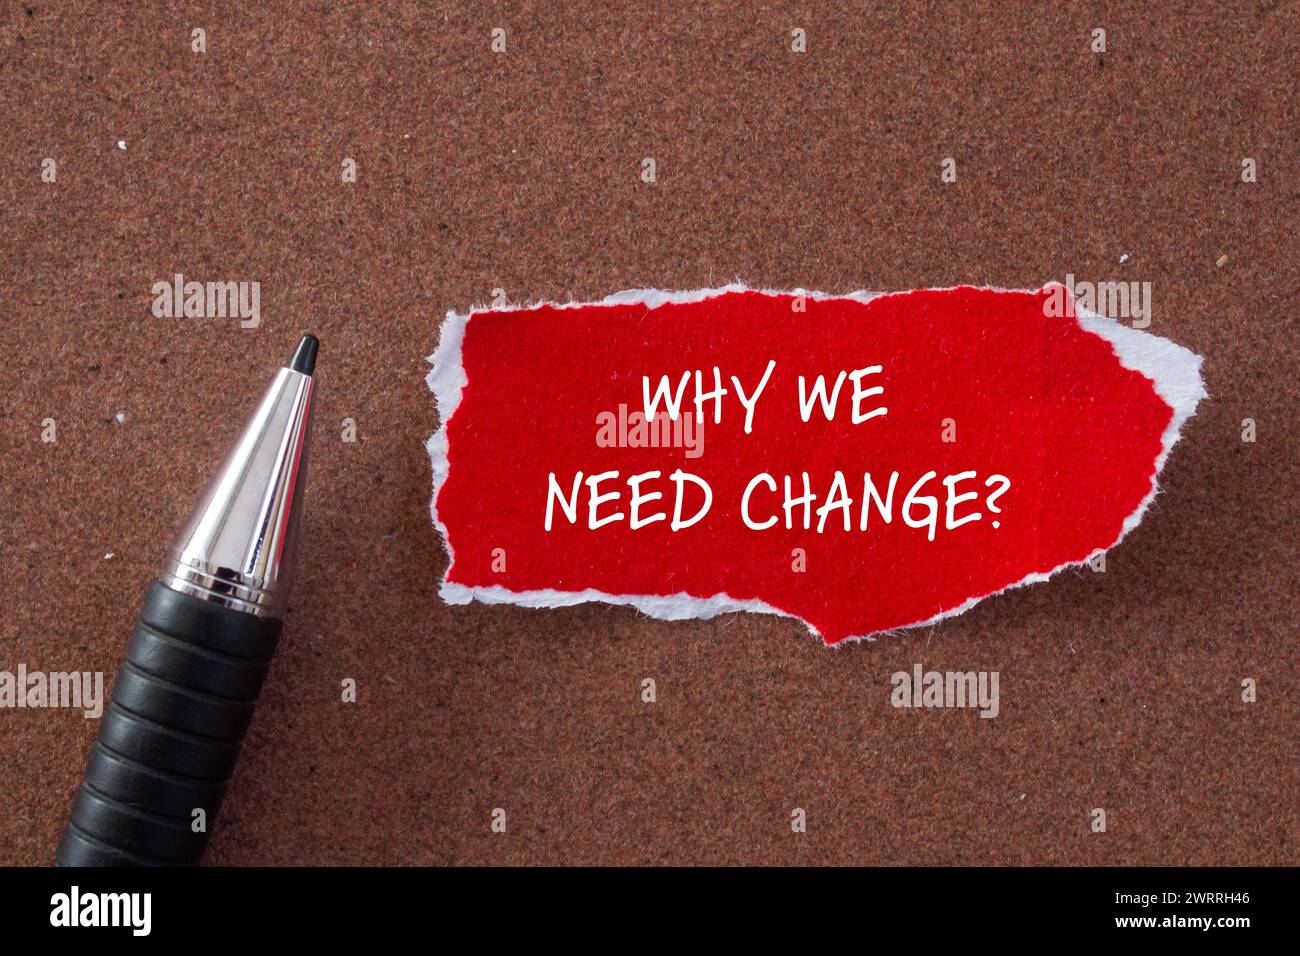 Why we need change words written on red torn paper with brown background. Conceptual symbol. Copy space. Stock Photo